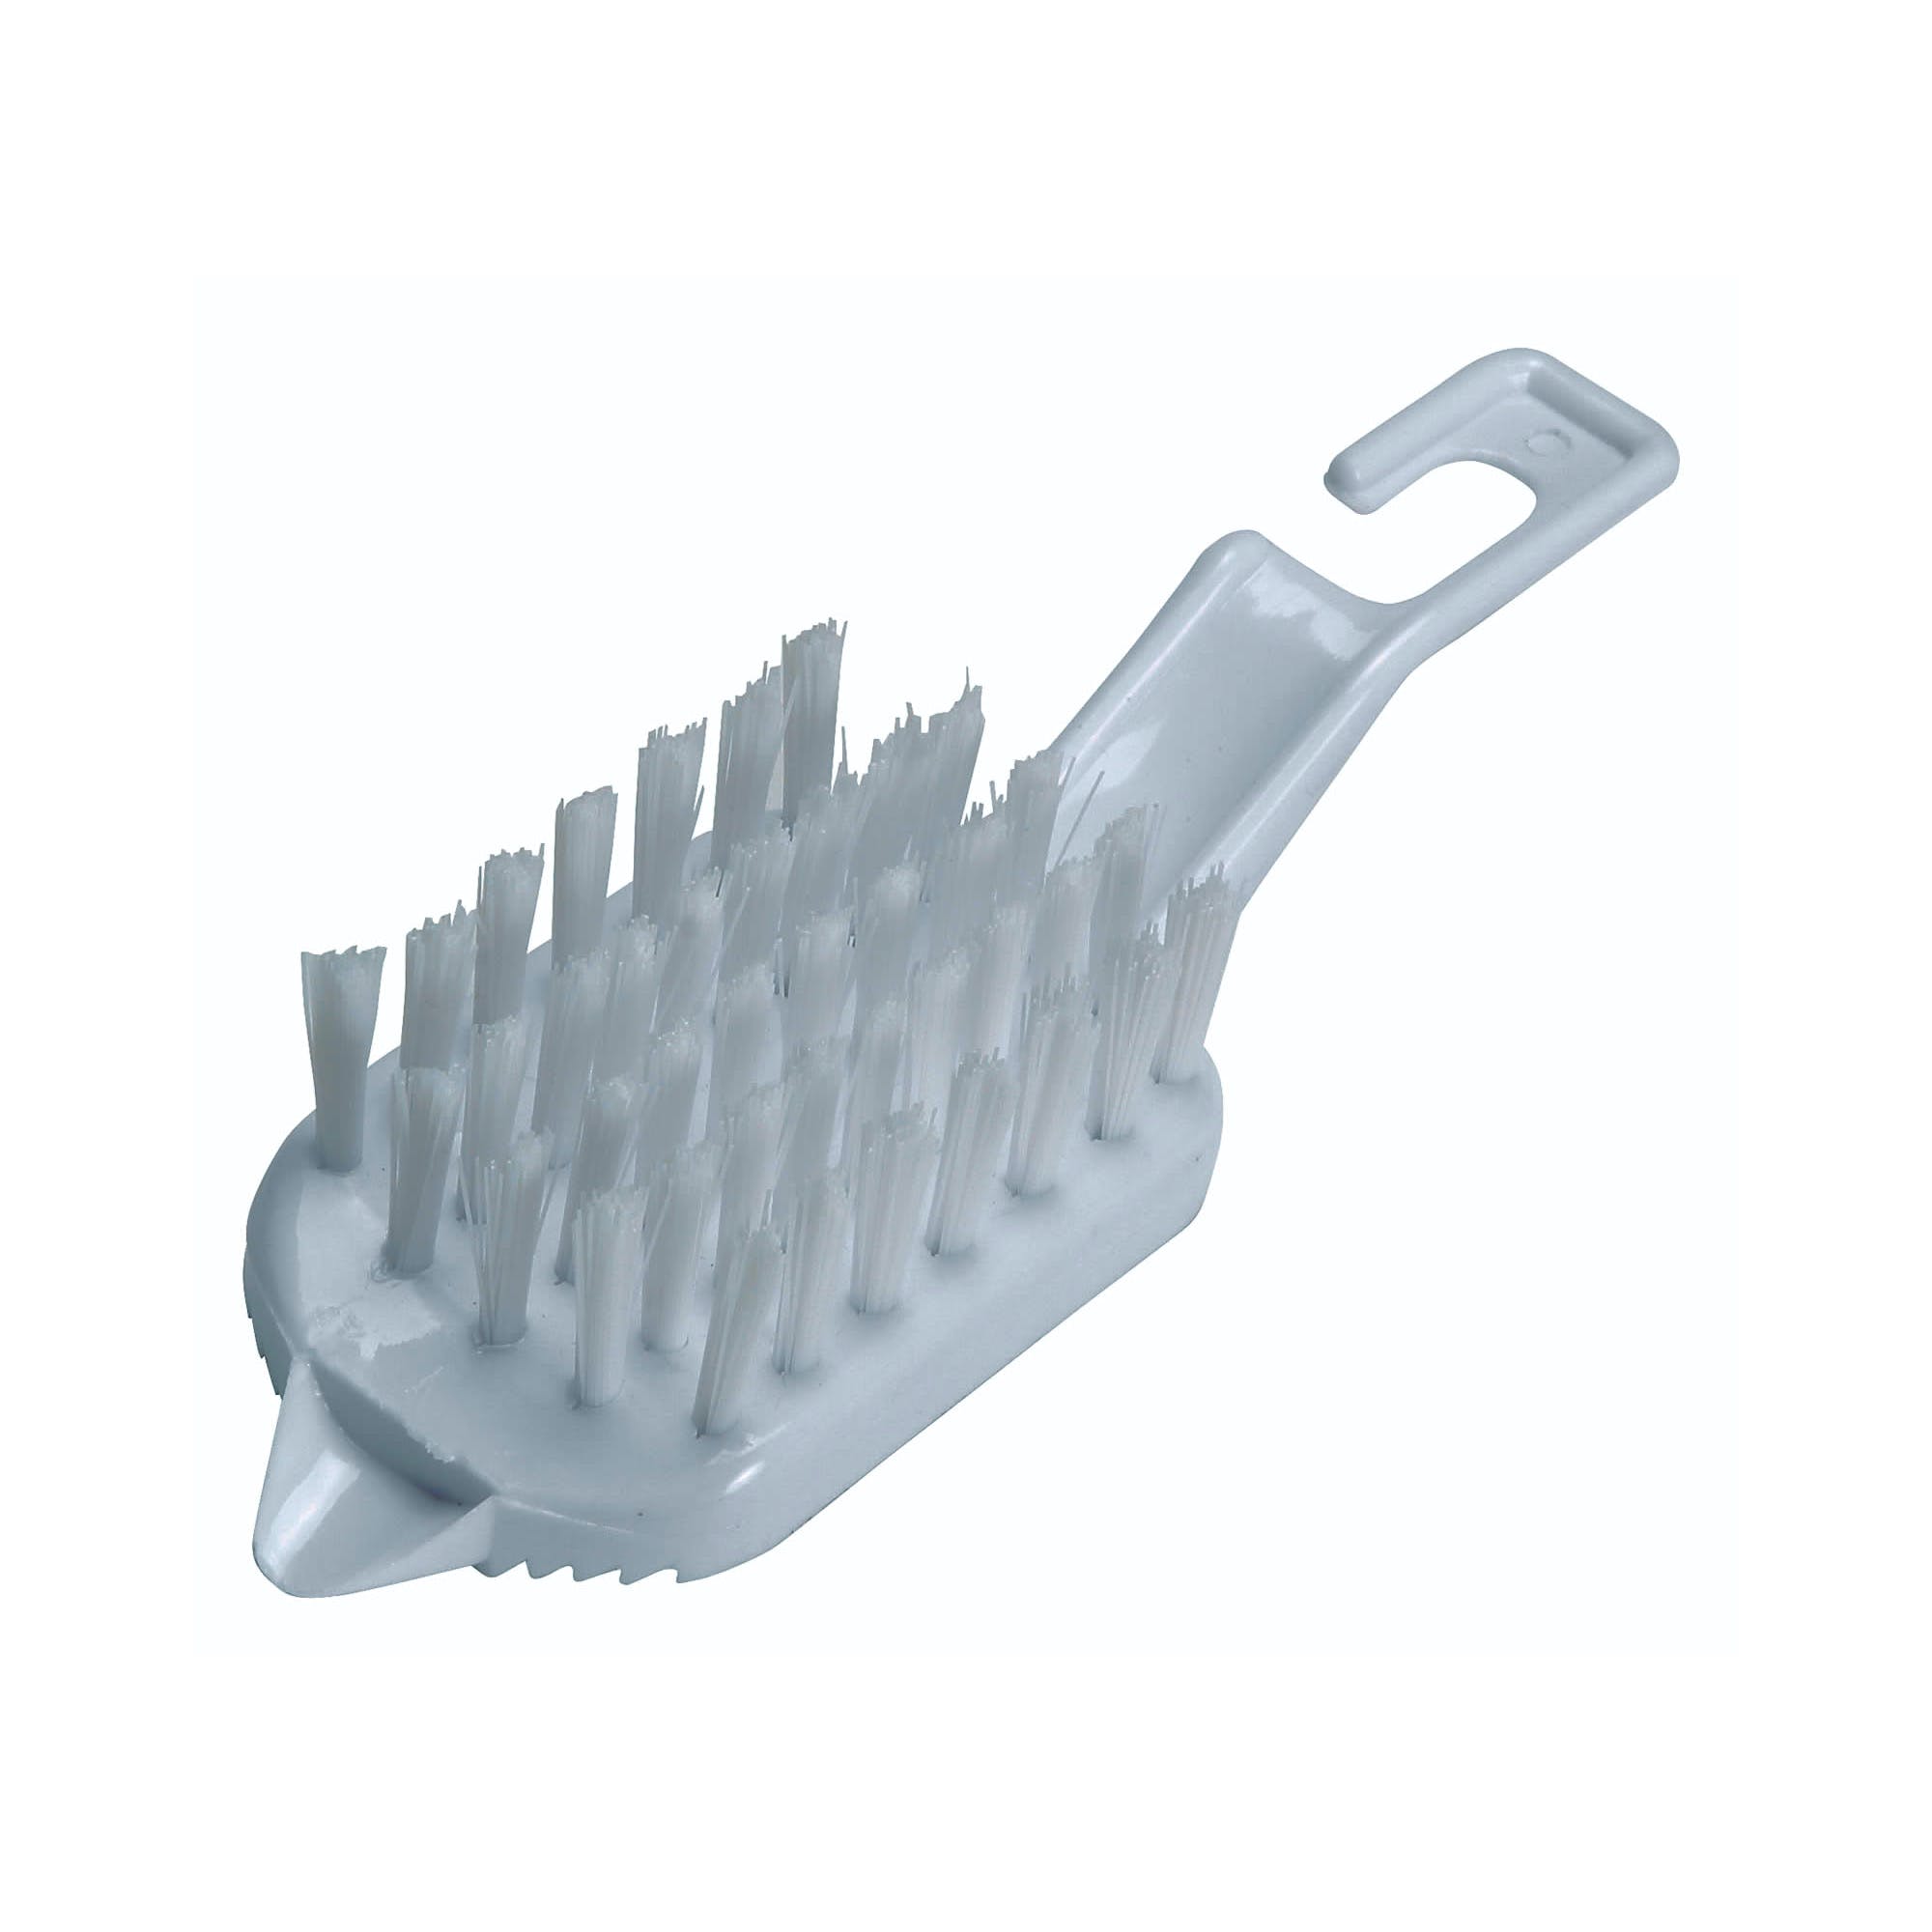 KitchenCraft Vegetable Cleaning Brush - The Cooks Cupboard Ltd